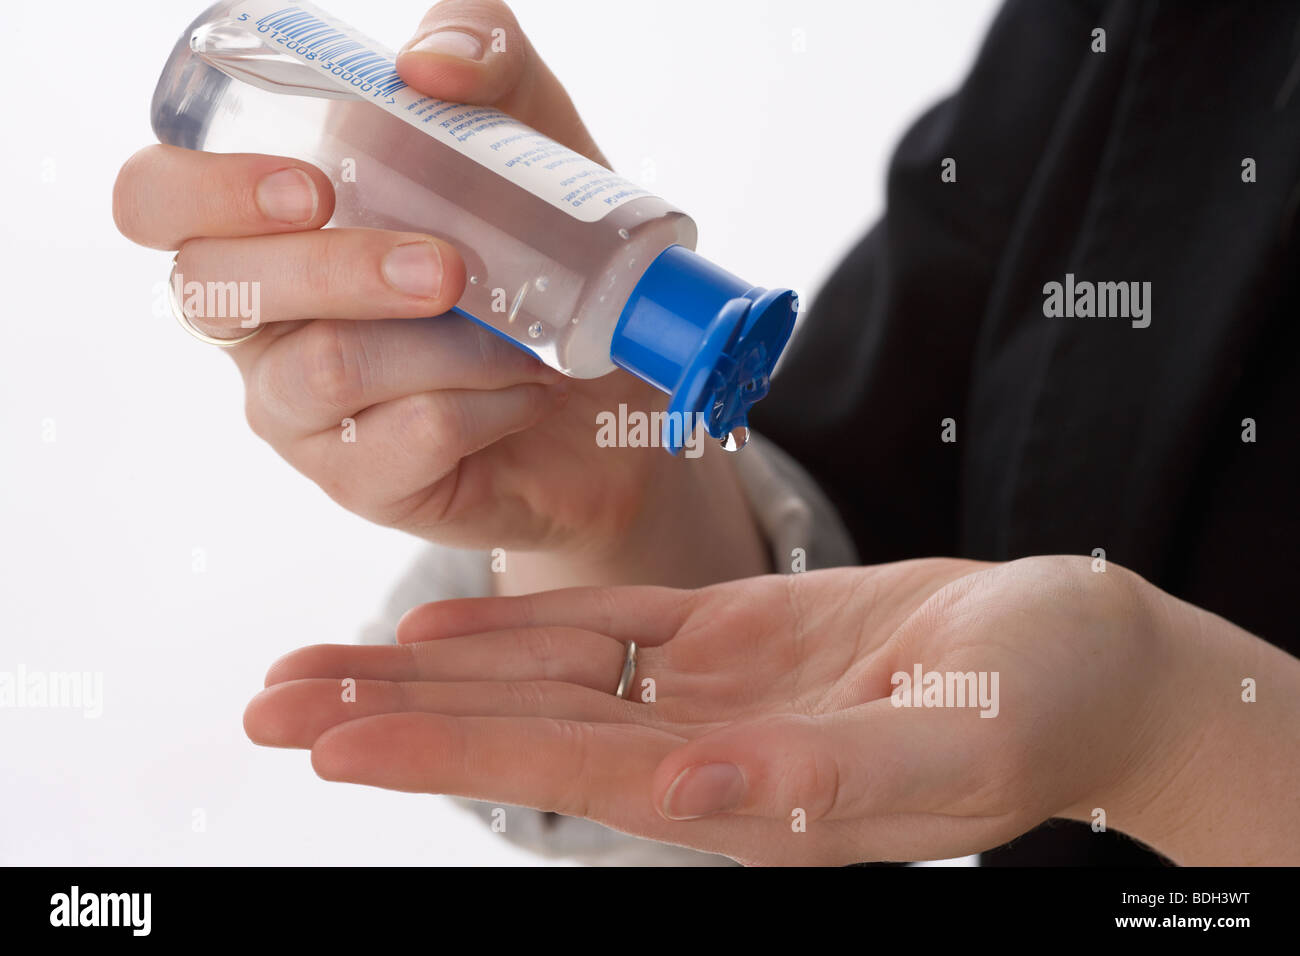 young 20 year old woman cleaning her hands with an alcohol gel hand santizer to kill infection and bacteria using hand sanitiser against virus Stock Photo